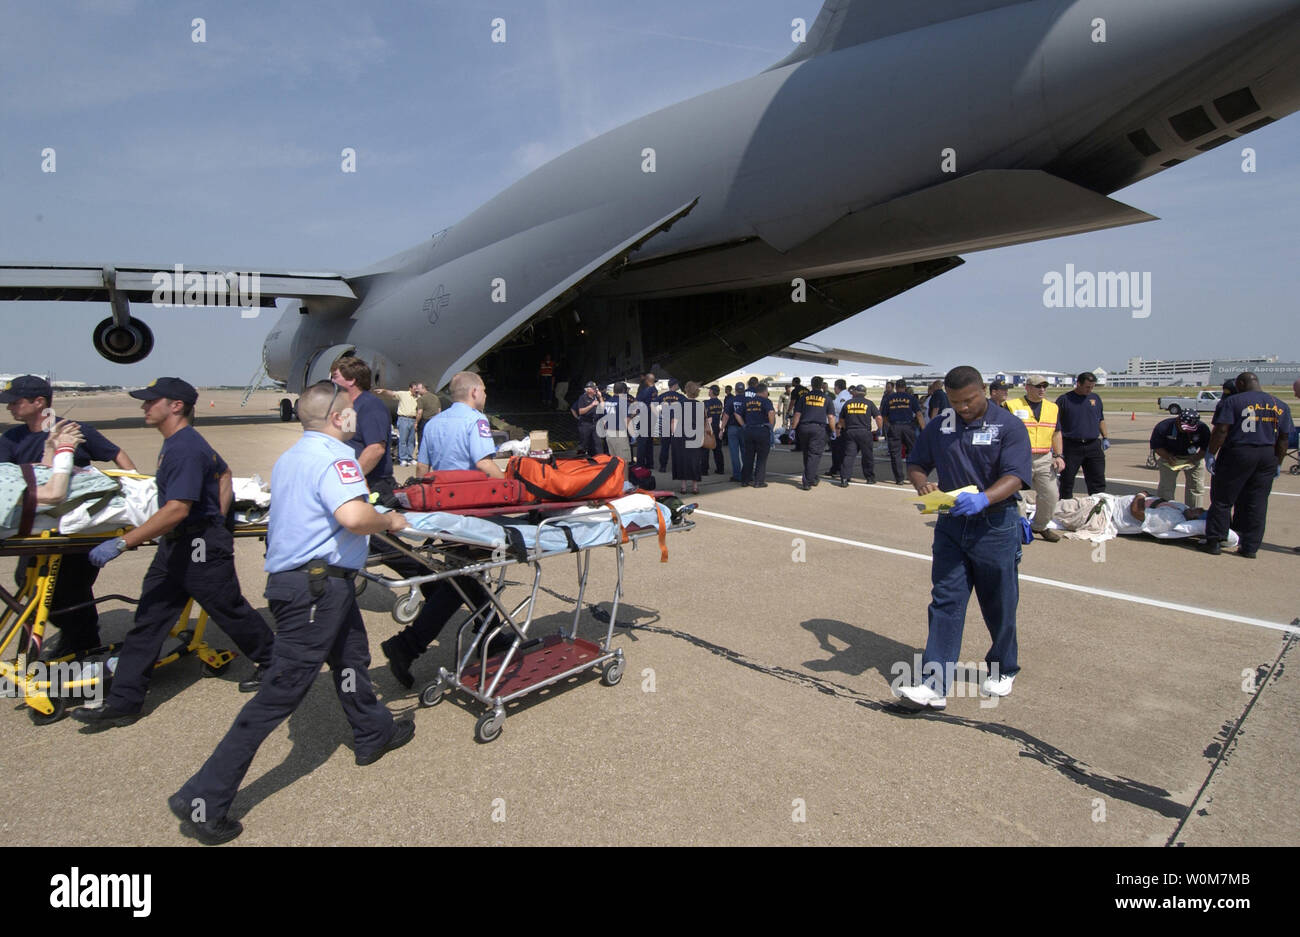 Hospital patients from Beaumont, Texas, are taken off a C-5 Galaxy from the 21st Airlift Wing, Travis Air Force Base, CA, en route to one of the many medical facilities set up to care for evacuees from the path of Hurricane Rita, on September 23, 2005 in Dallas Texas.   (UPI Photo/ Jennifer C. Wallis) Stock Photo